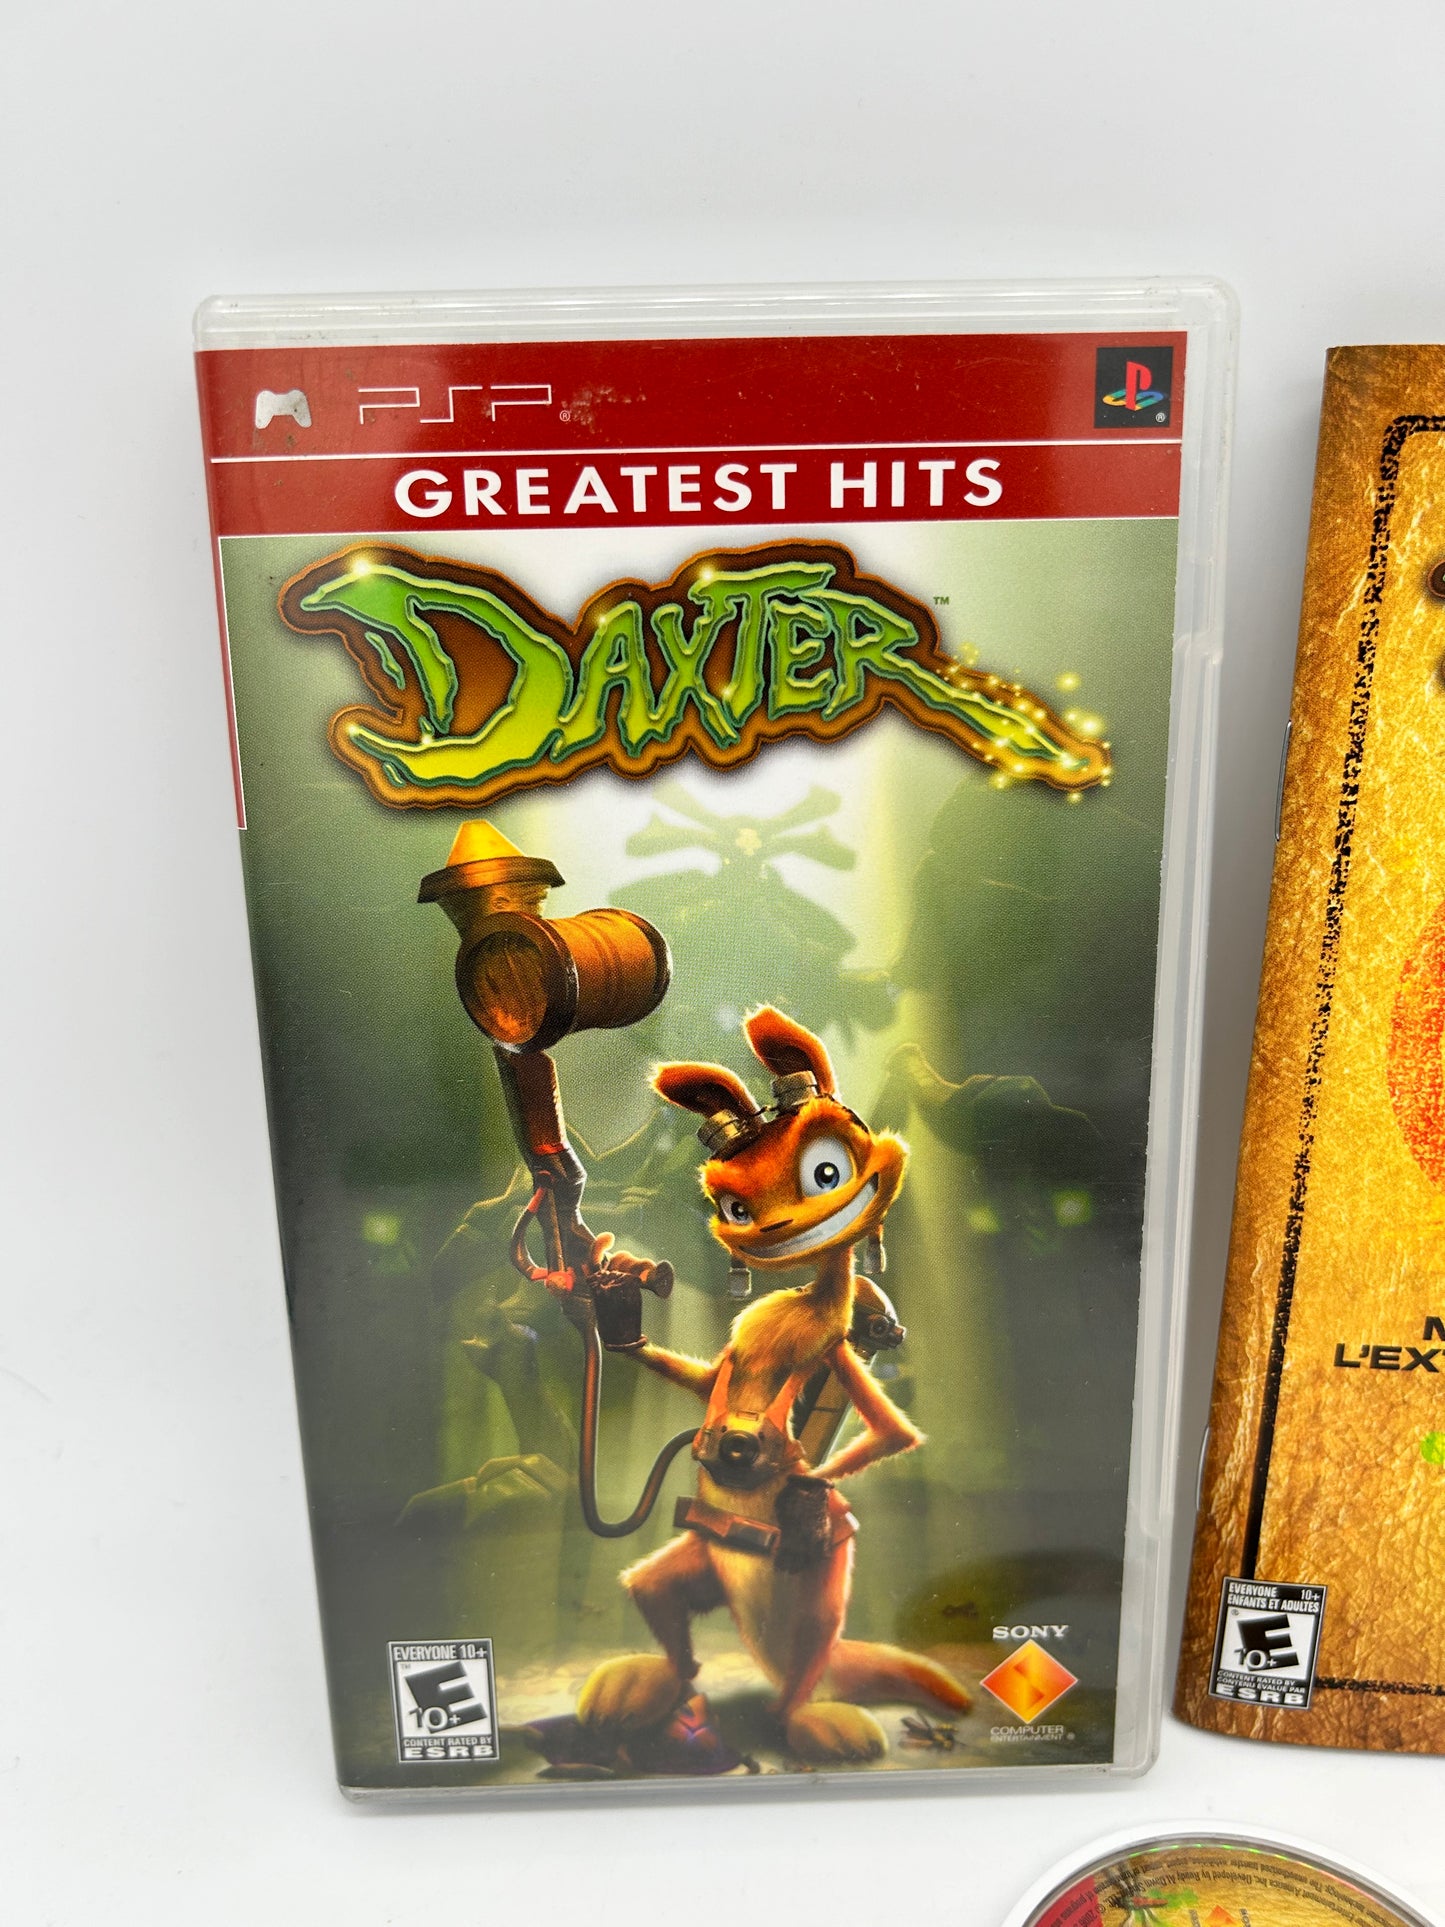 SONY PLAYSTATiON PORTABLE [PSP] | DAXTER | GREATEST HiTS